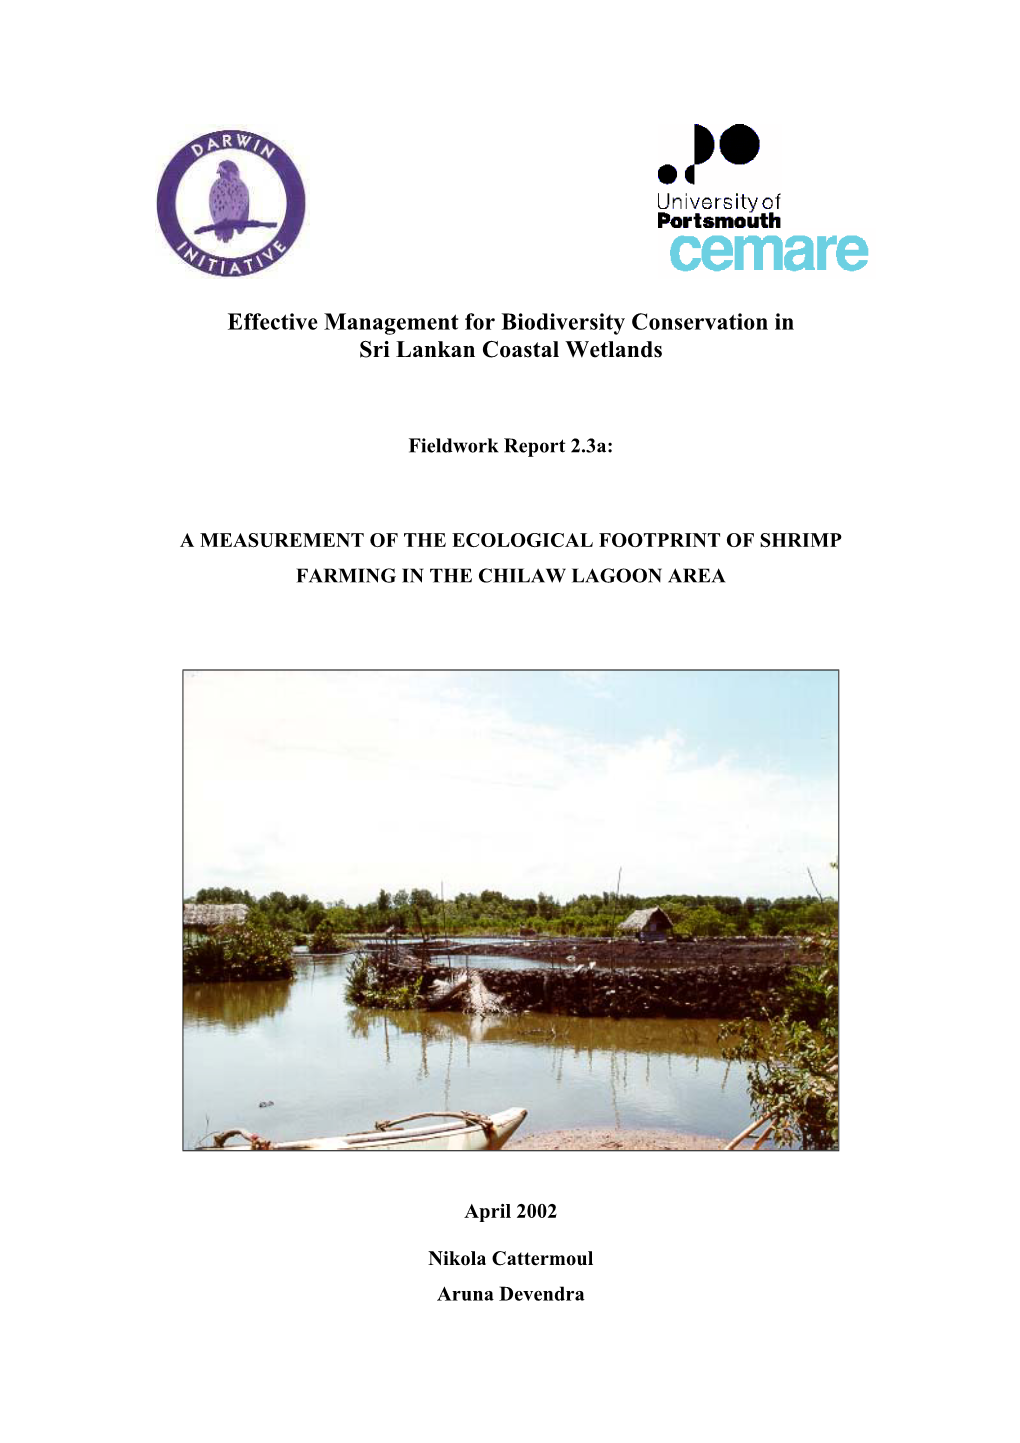 Ecological Footprint of Shrimp Farming in the Chilaw Lagoon Area